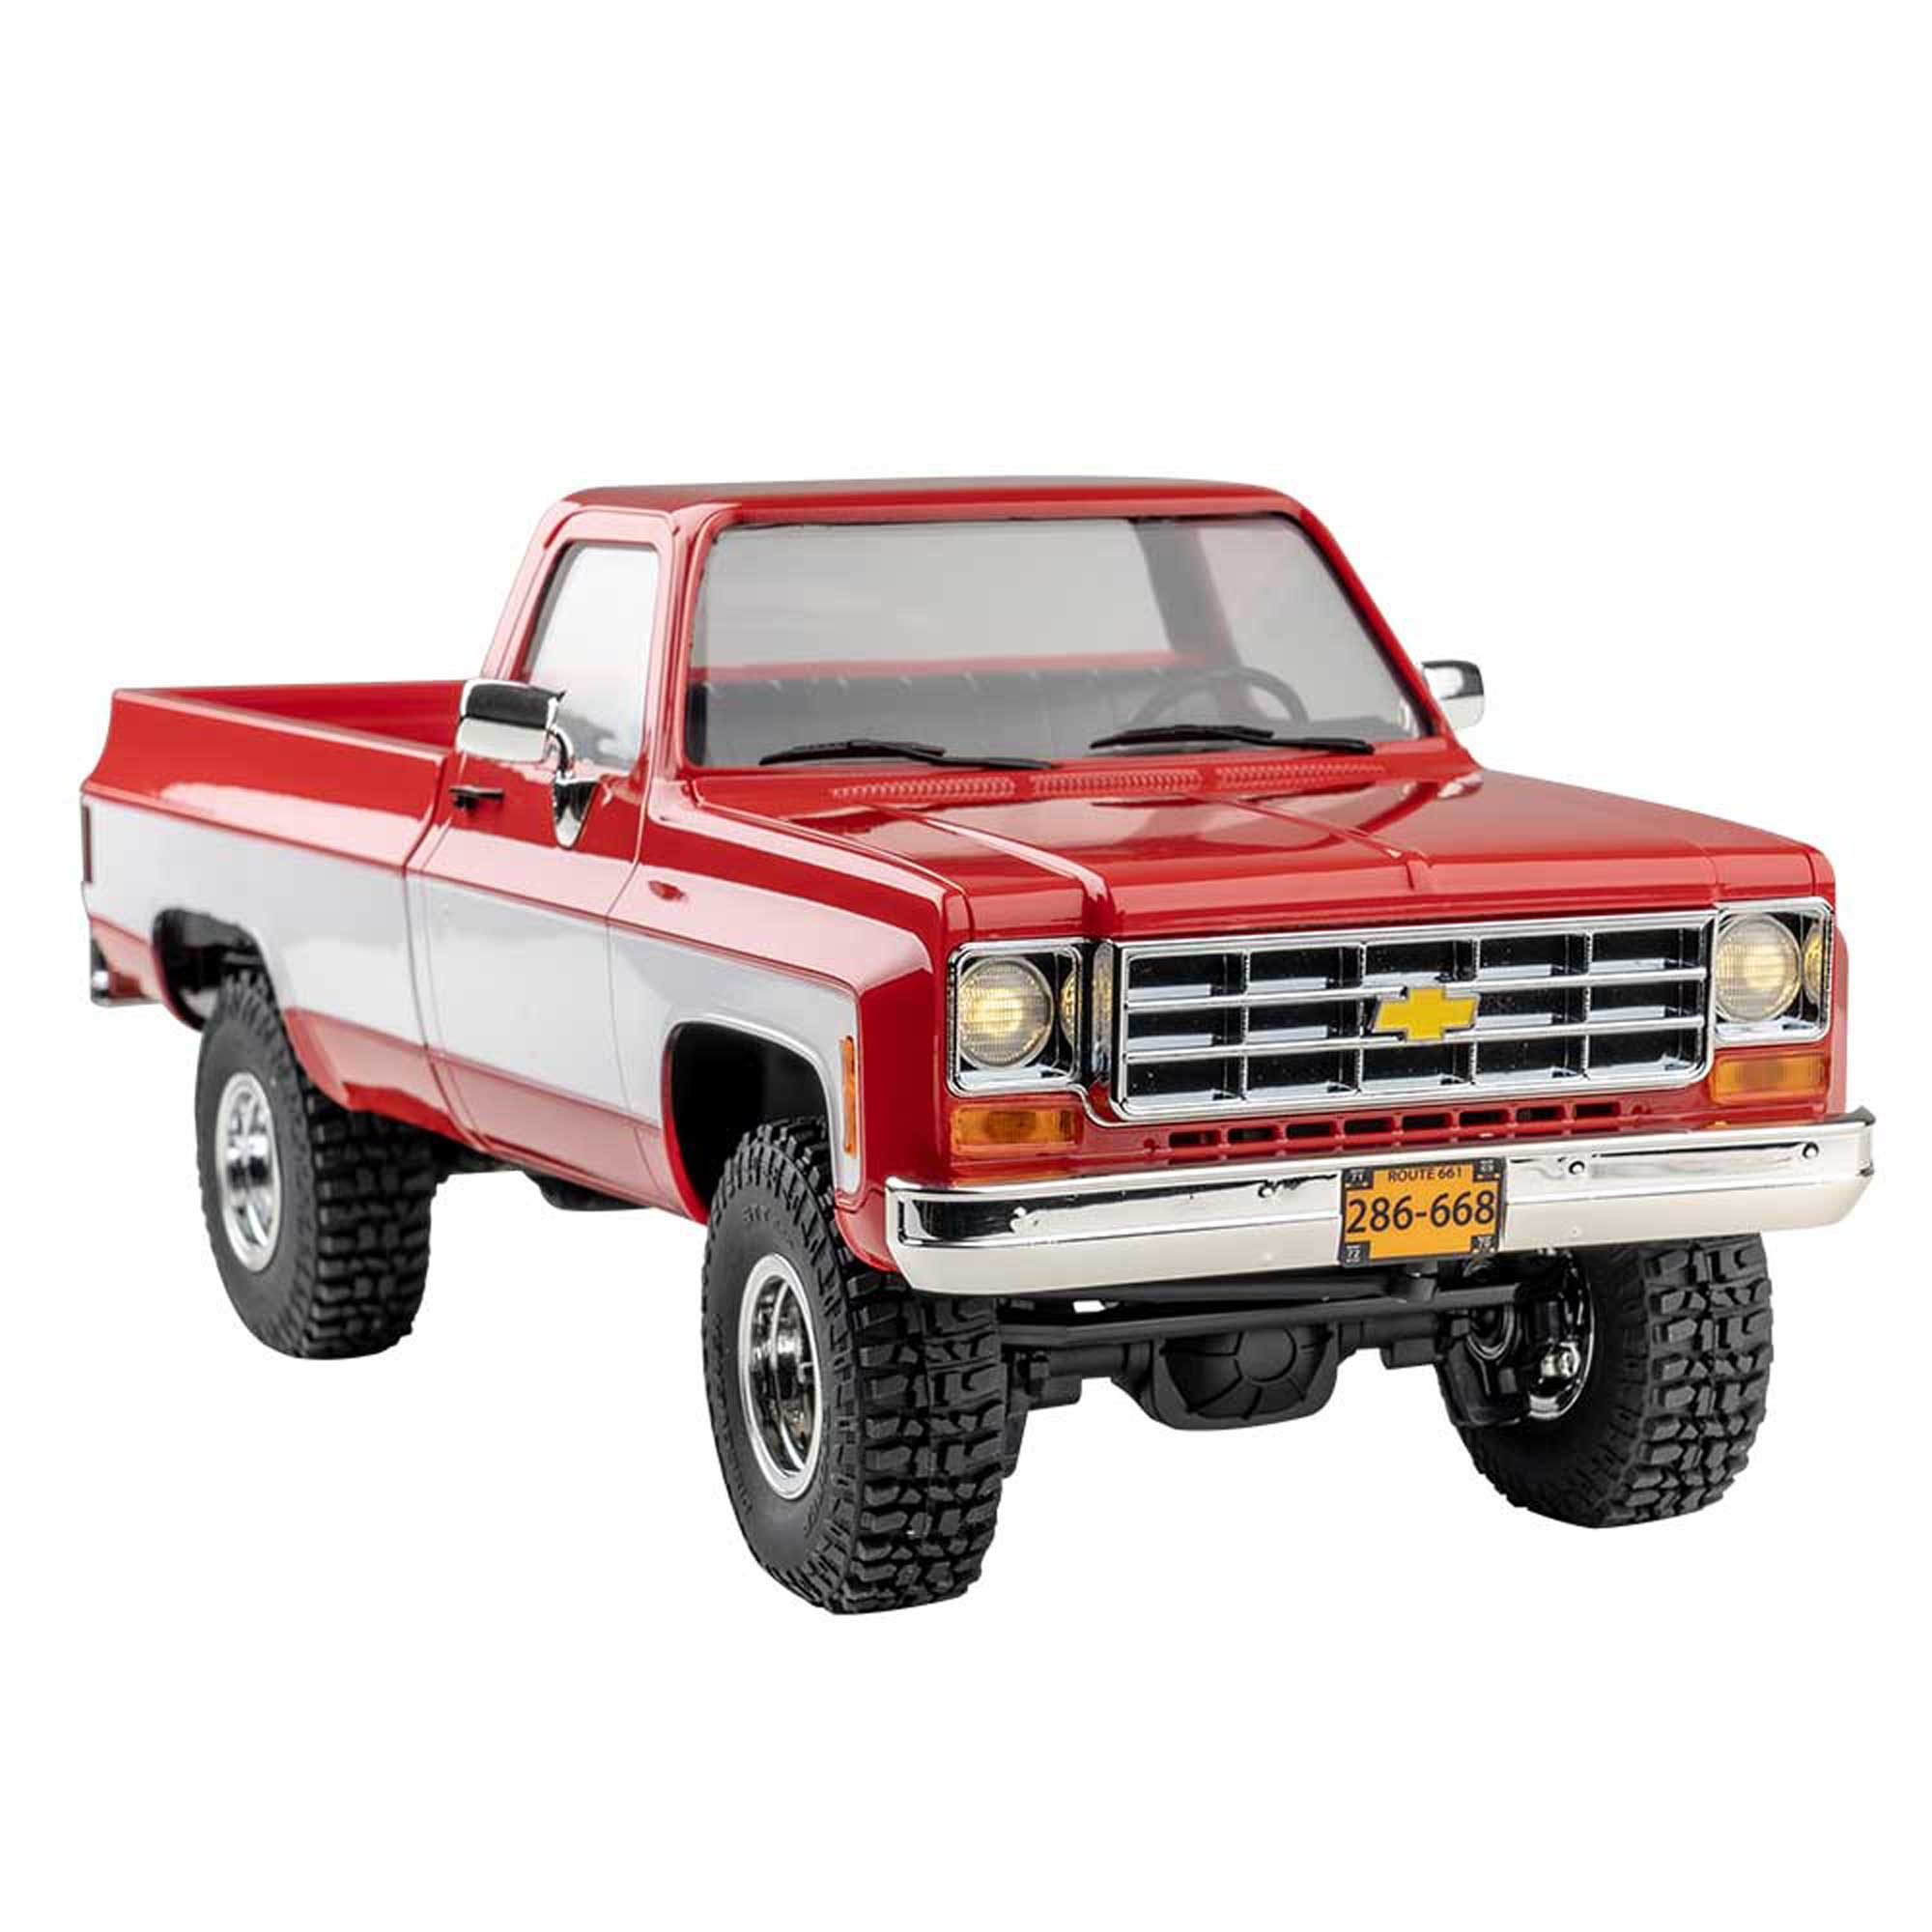 FMS 1/18 Chevrolet K10 4WD Brushed RTR | Tower Hobbies